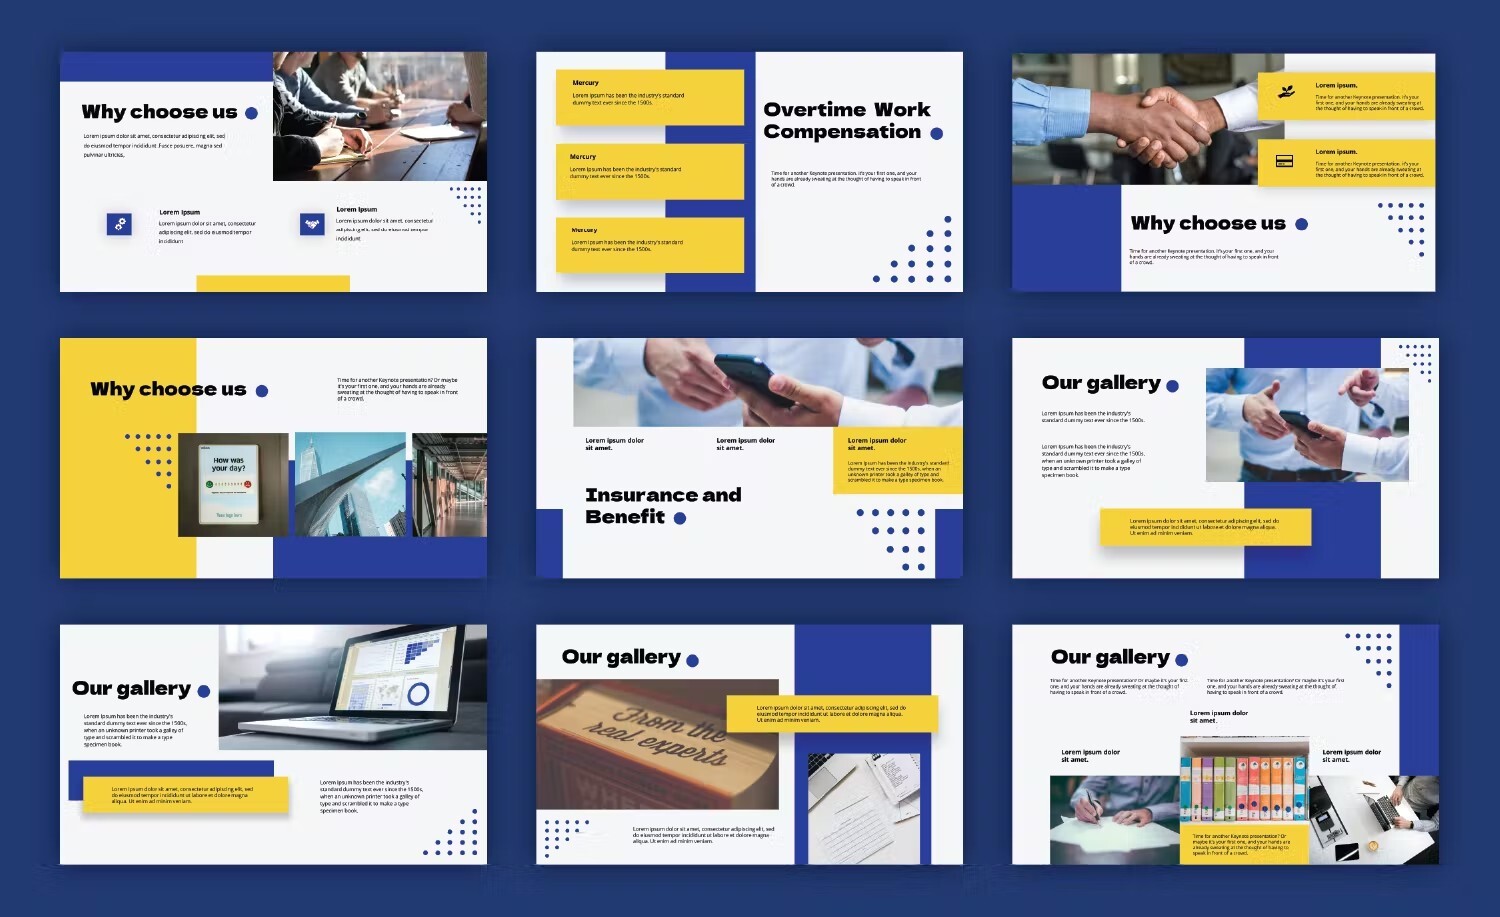 Dark blue template with bright yellow sections.